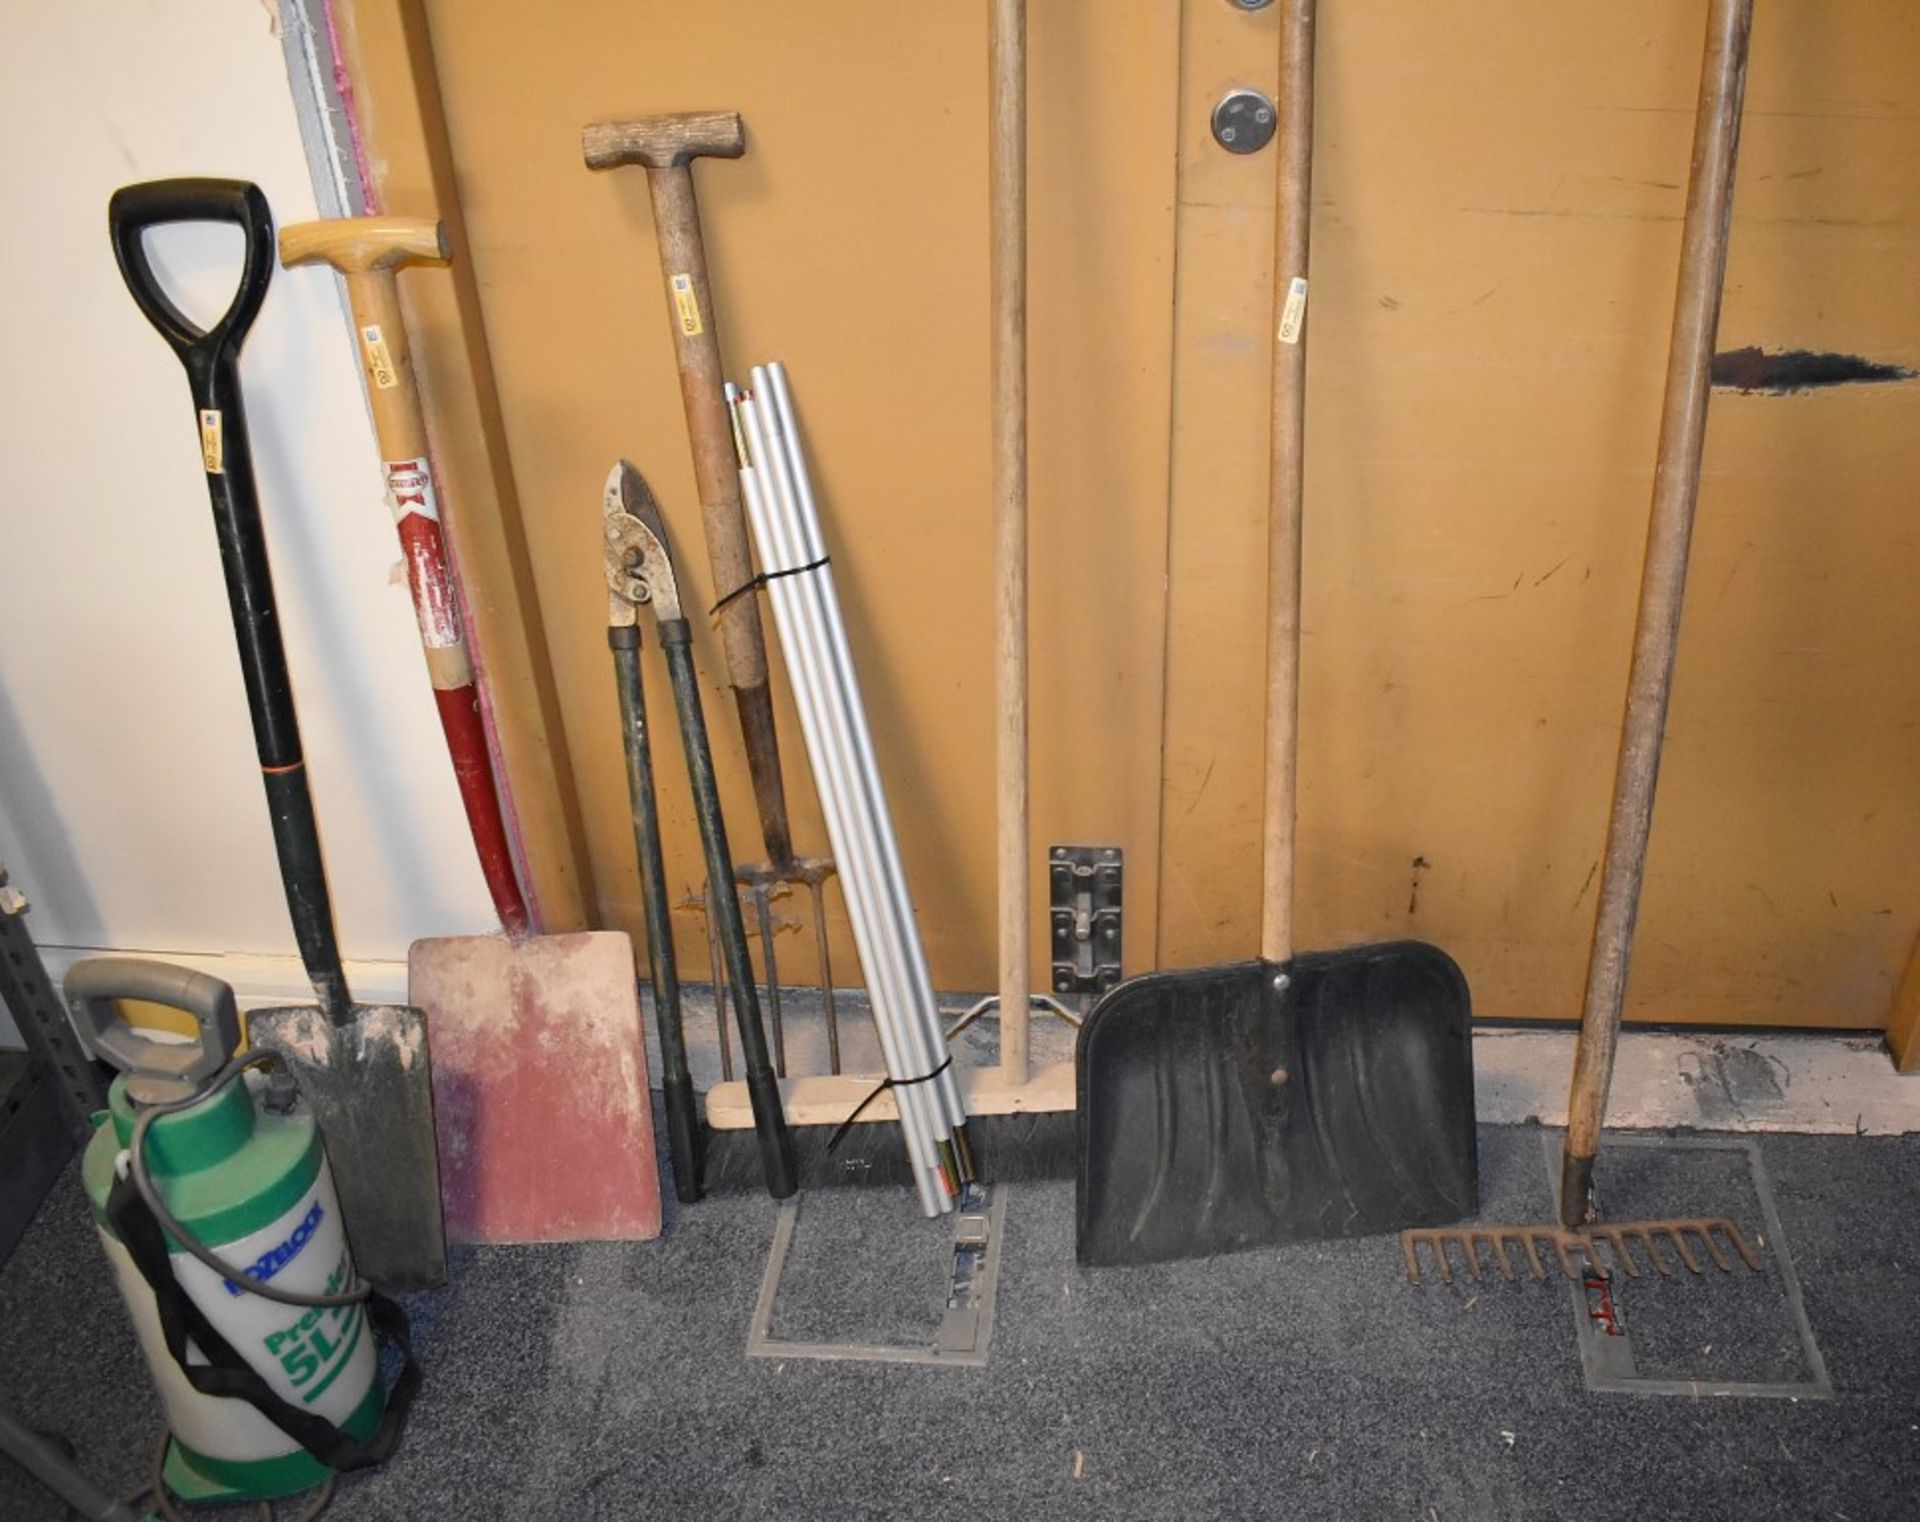 1 x Assorted Collection of Garden Tools - Includes 9 Items Including Shuvels, Rake, Pitch Fork